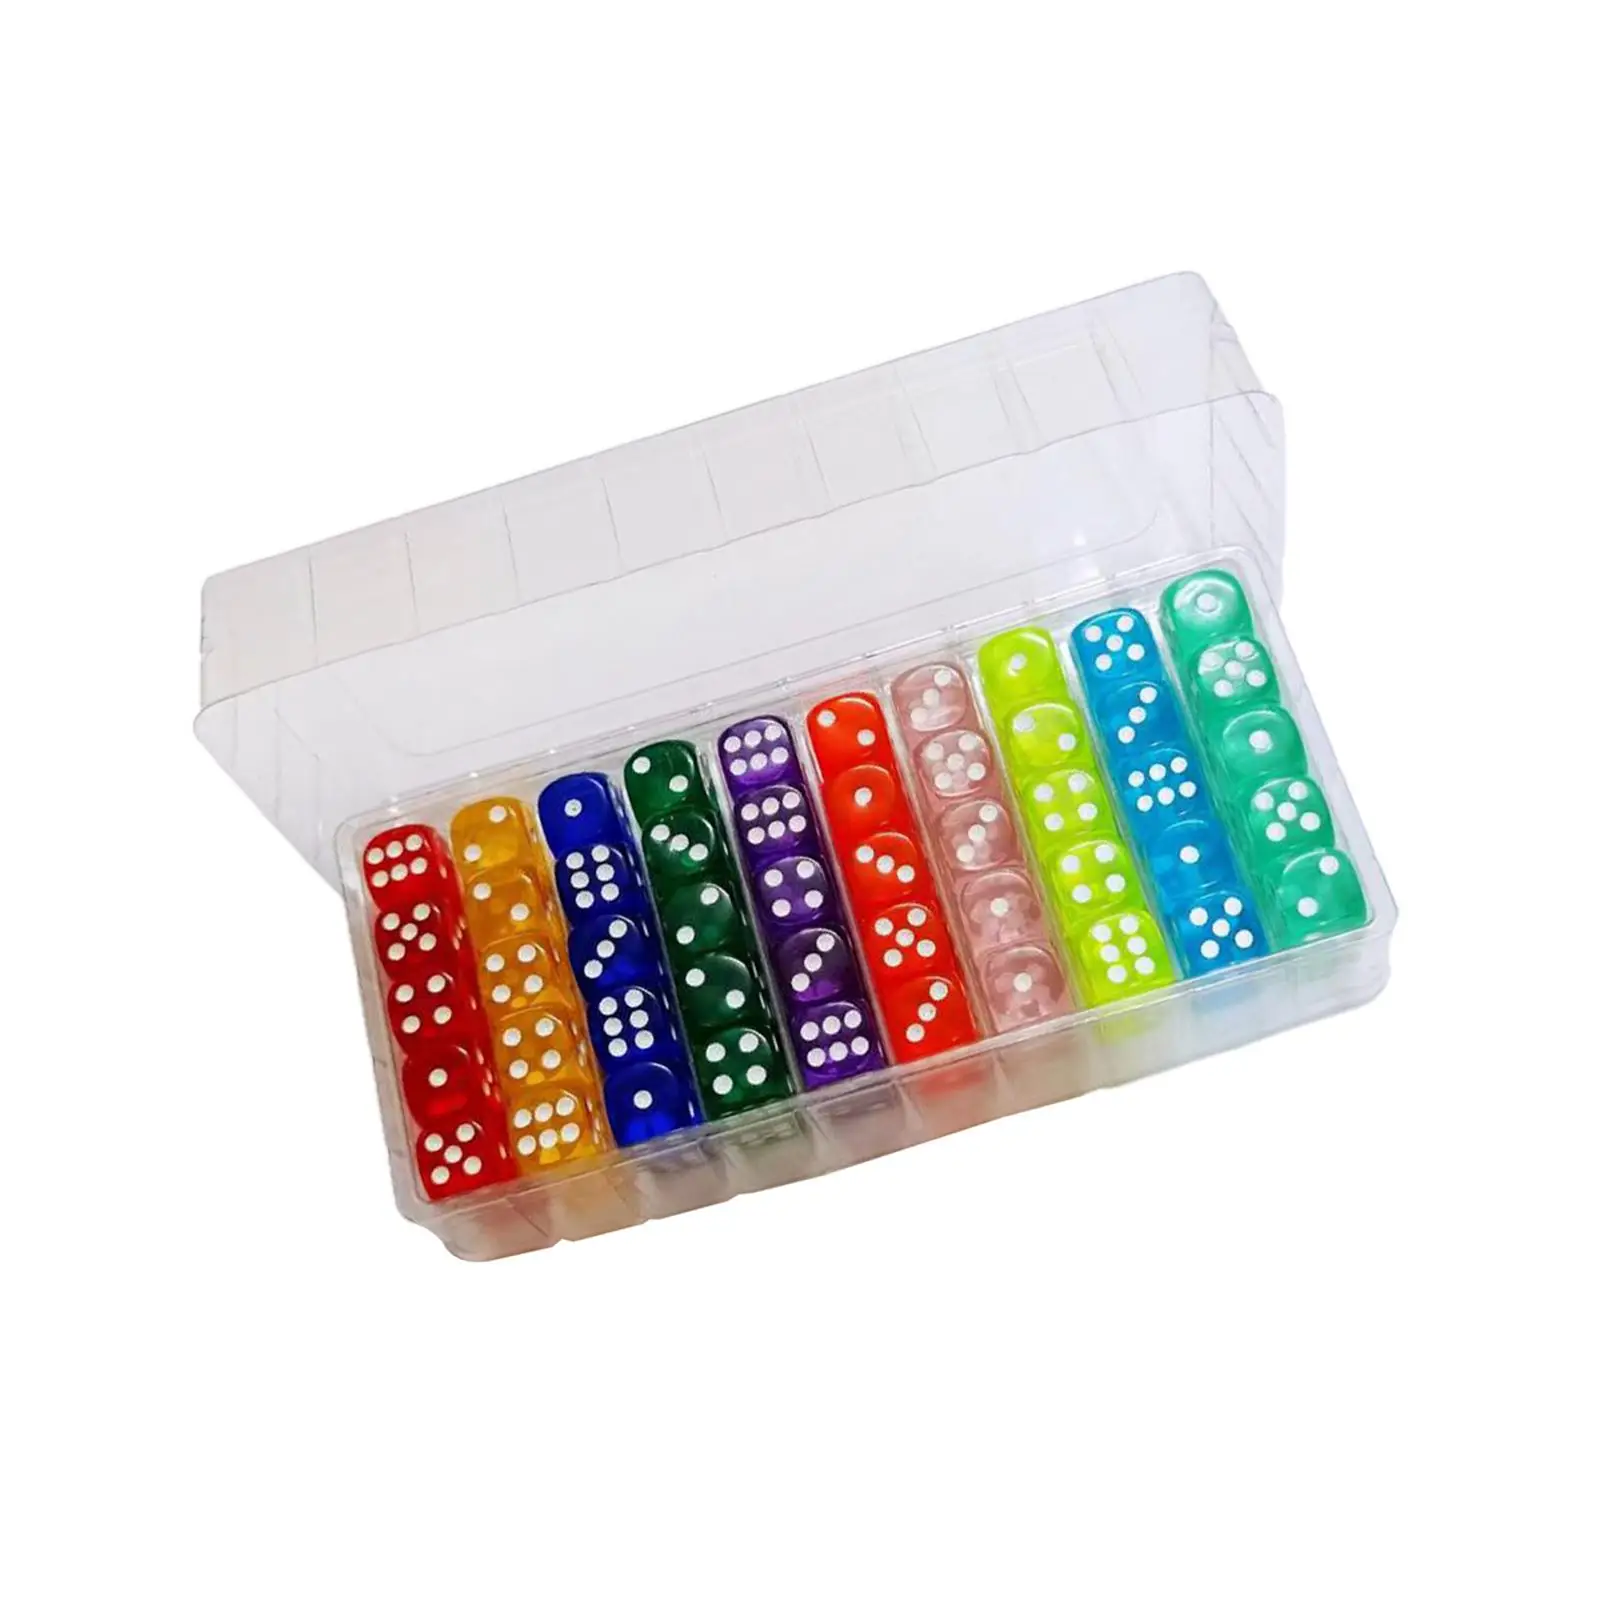 100 Pieces 6 Sided Dice Rounded Edges Acrylic Bulk Dice for Board Games Math Learning Classroom